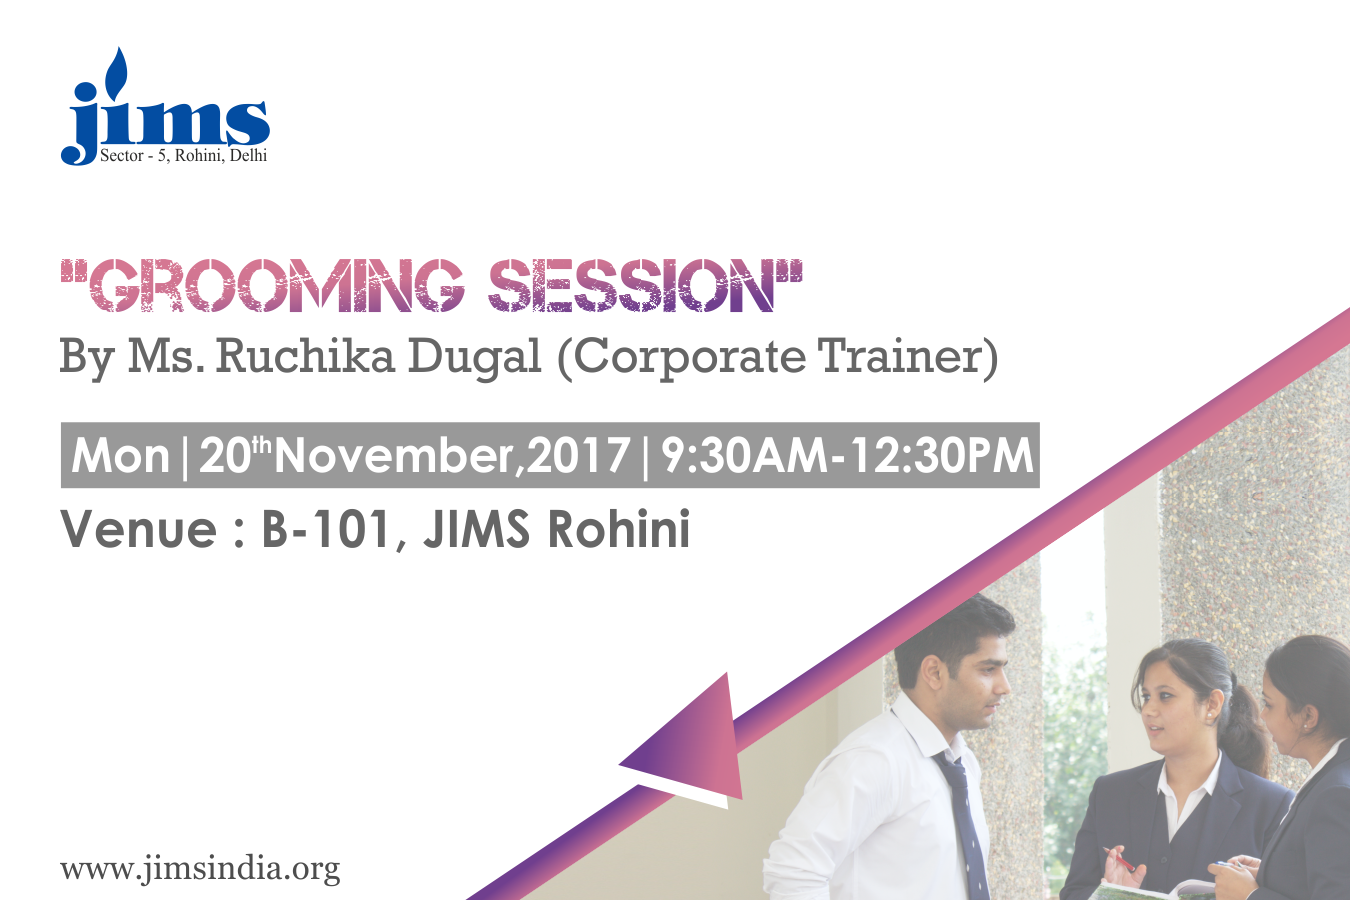 Grooming session 20 nov 2017